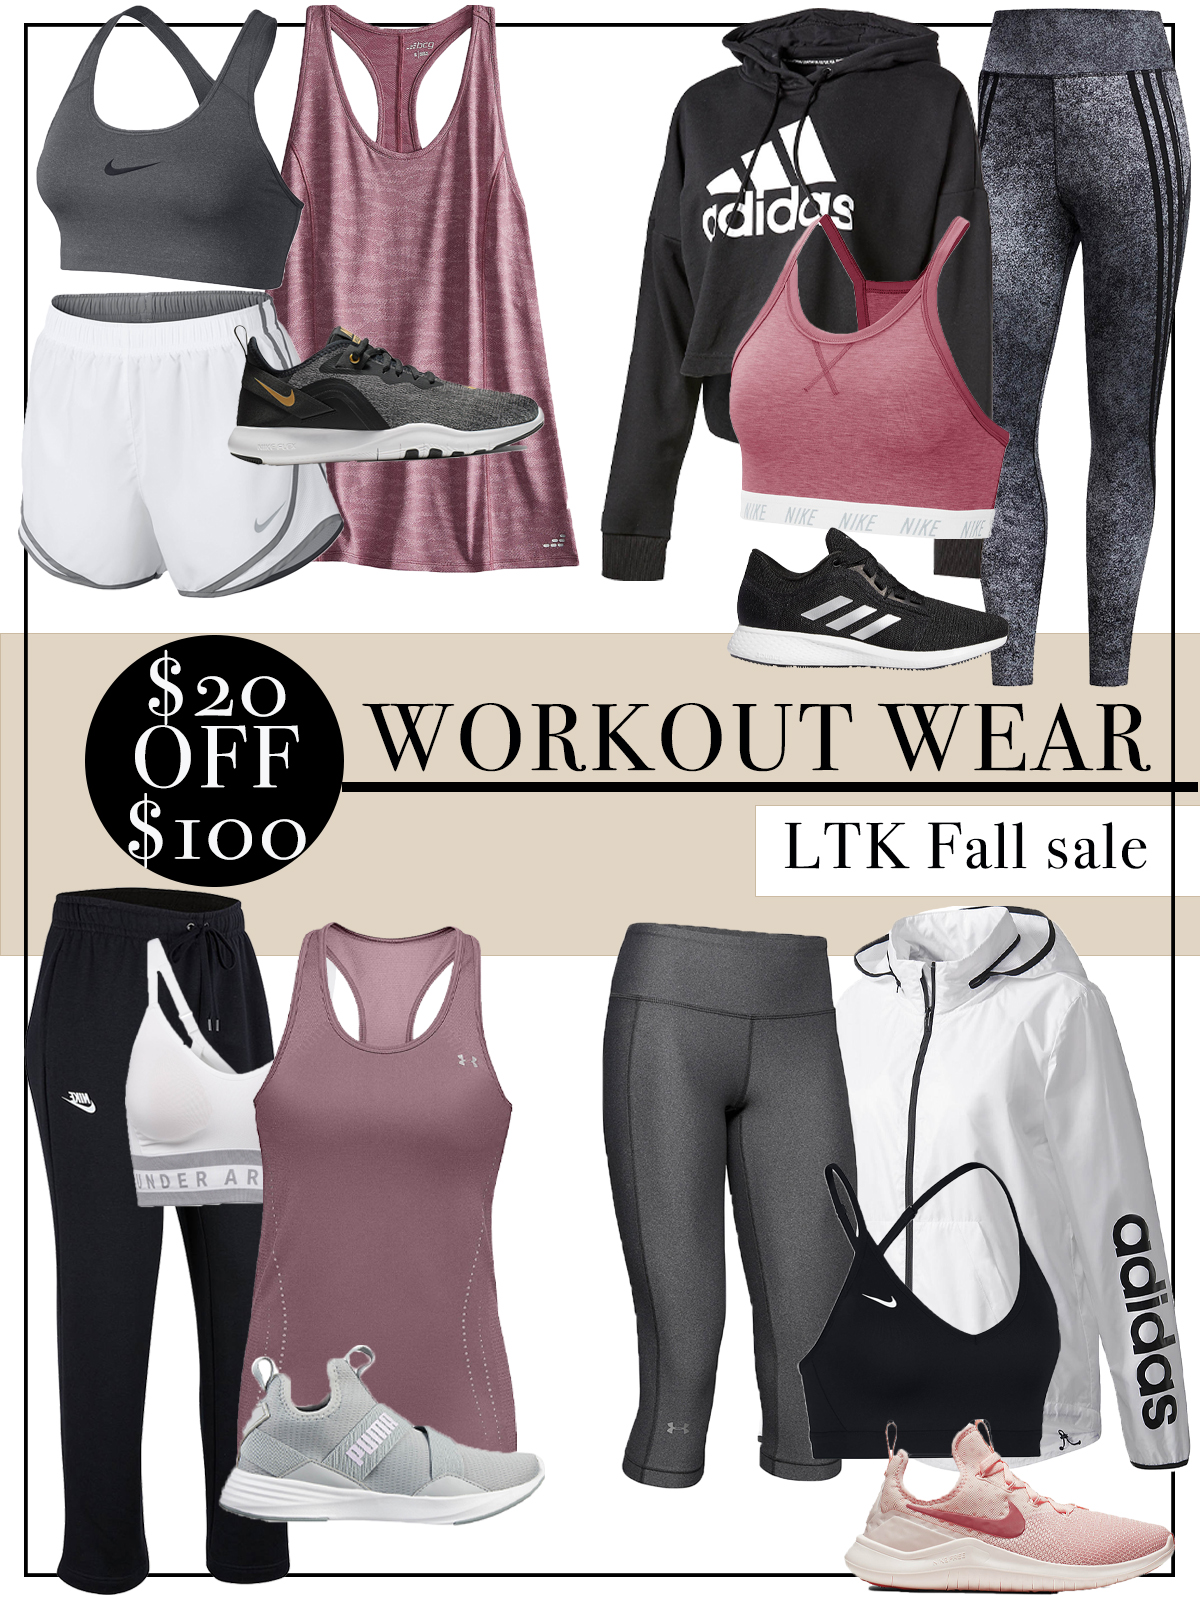 ACADEMY workout wear and outfit ideas.